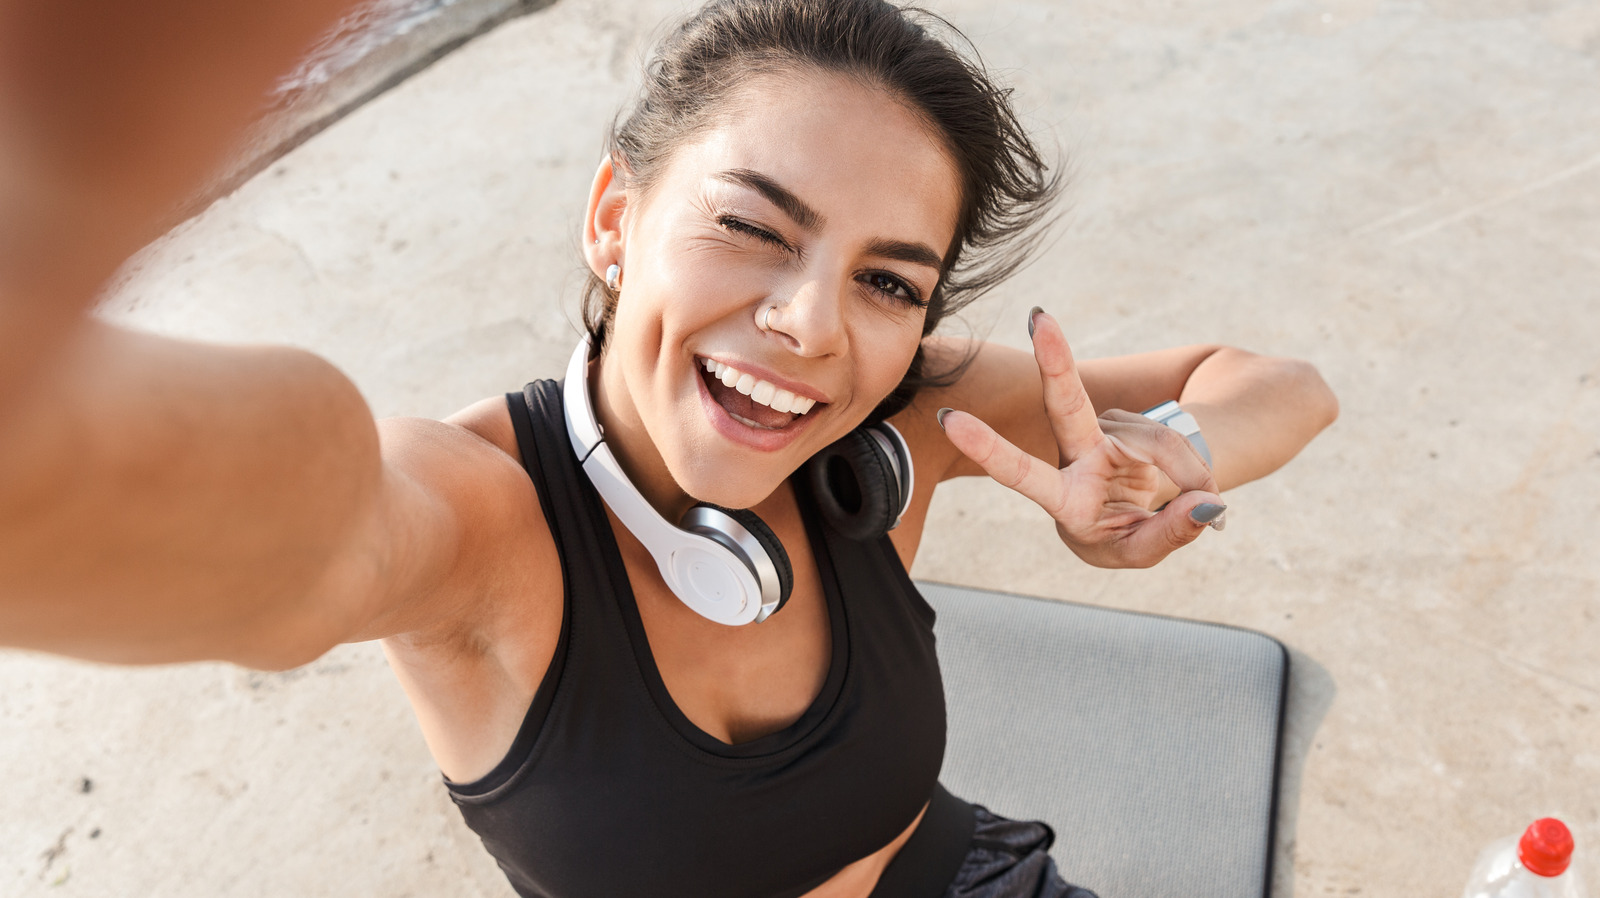 Do I have to wear a sports bra when I work out? - GirlsLife